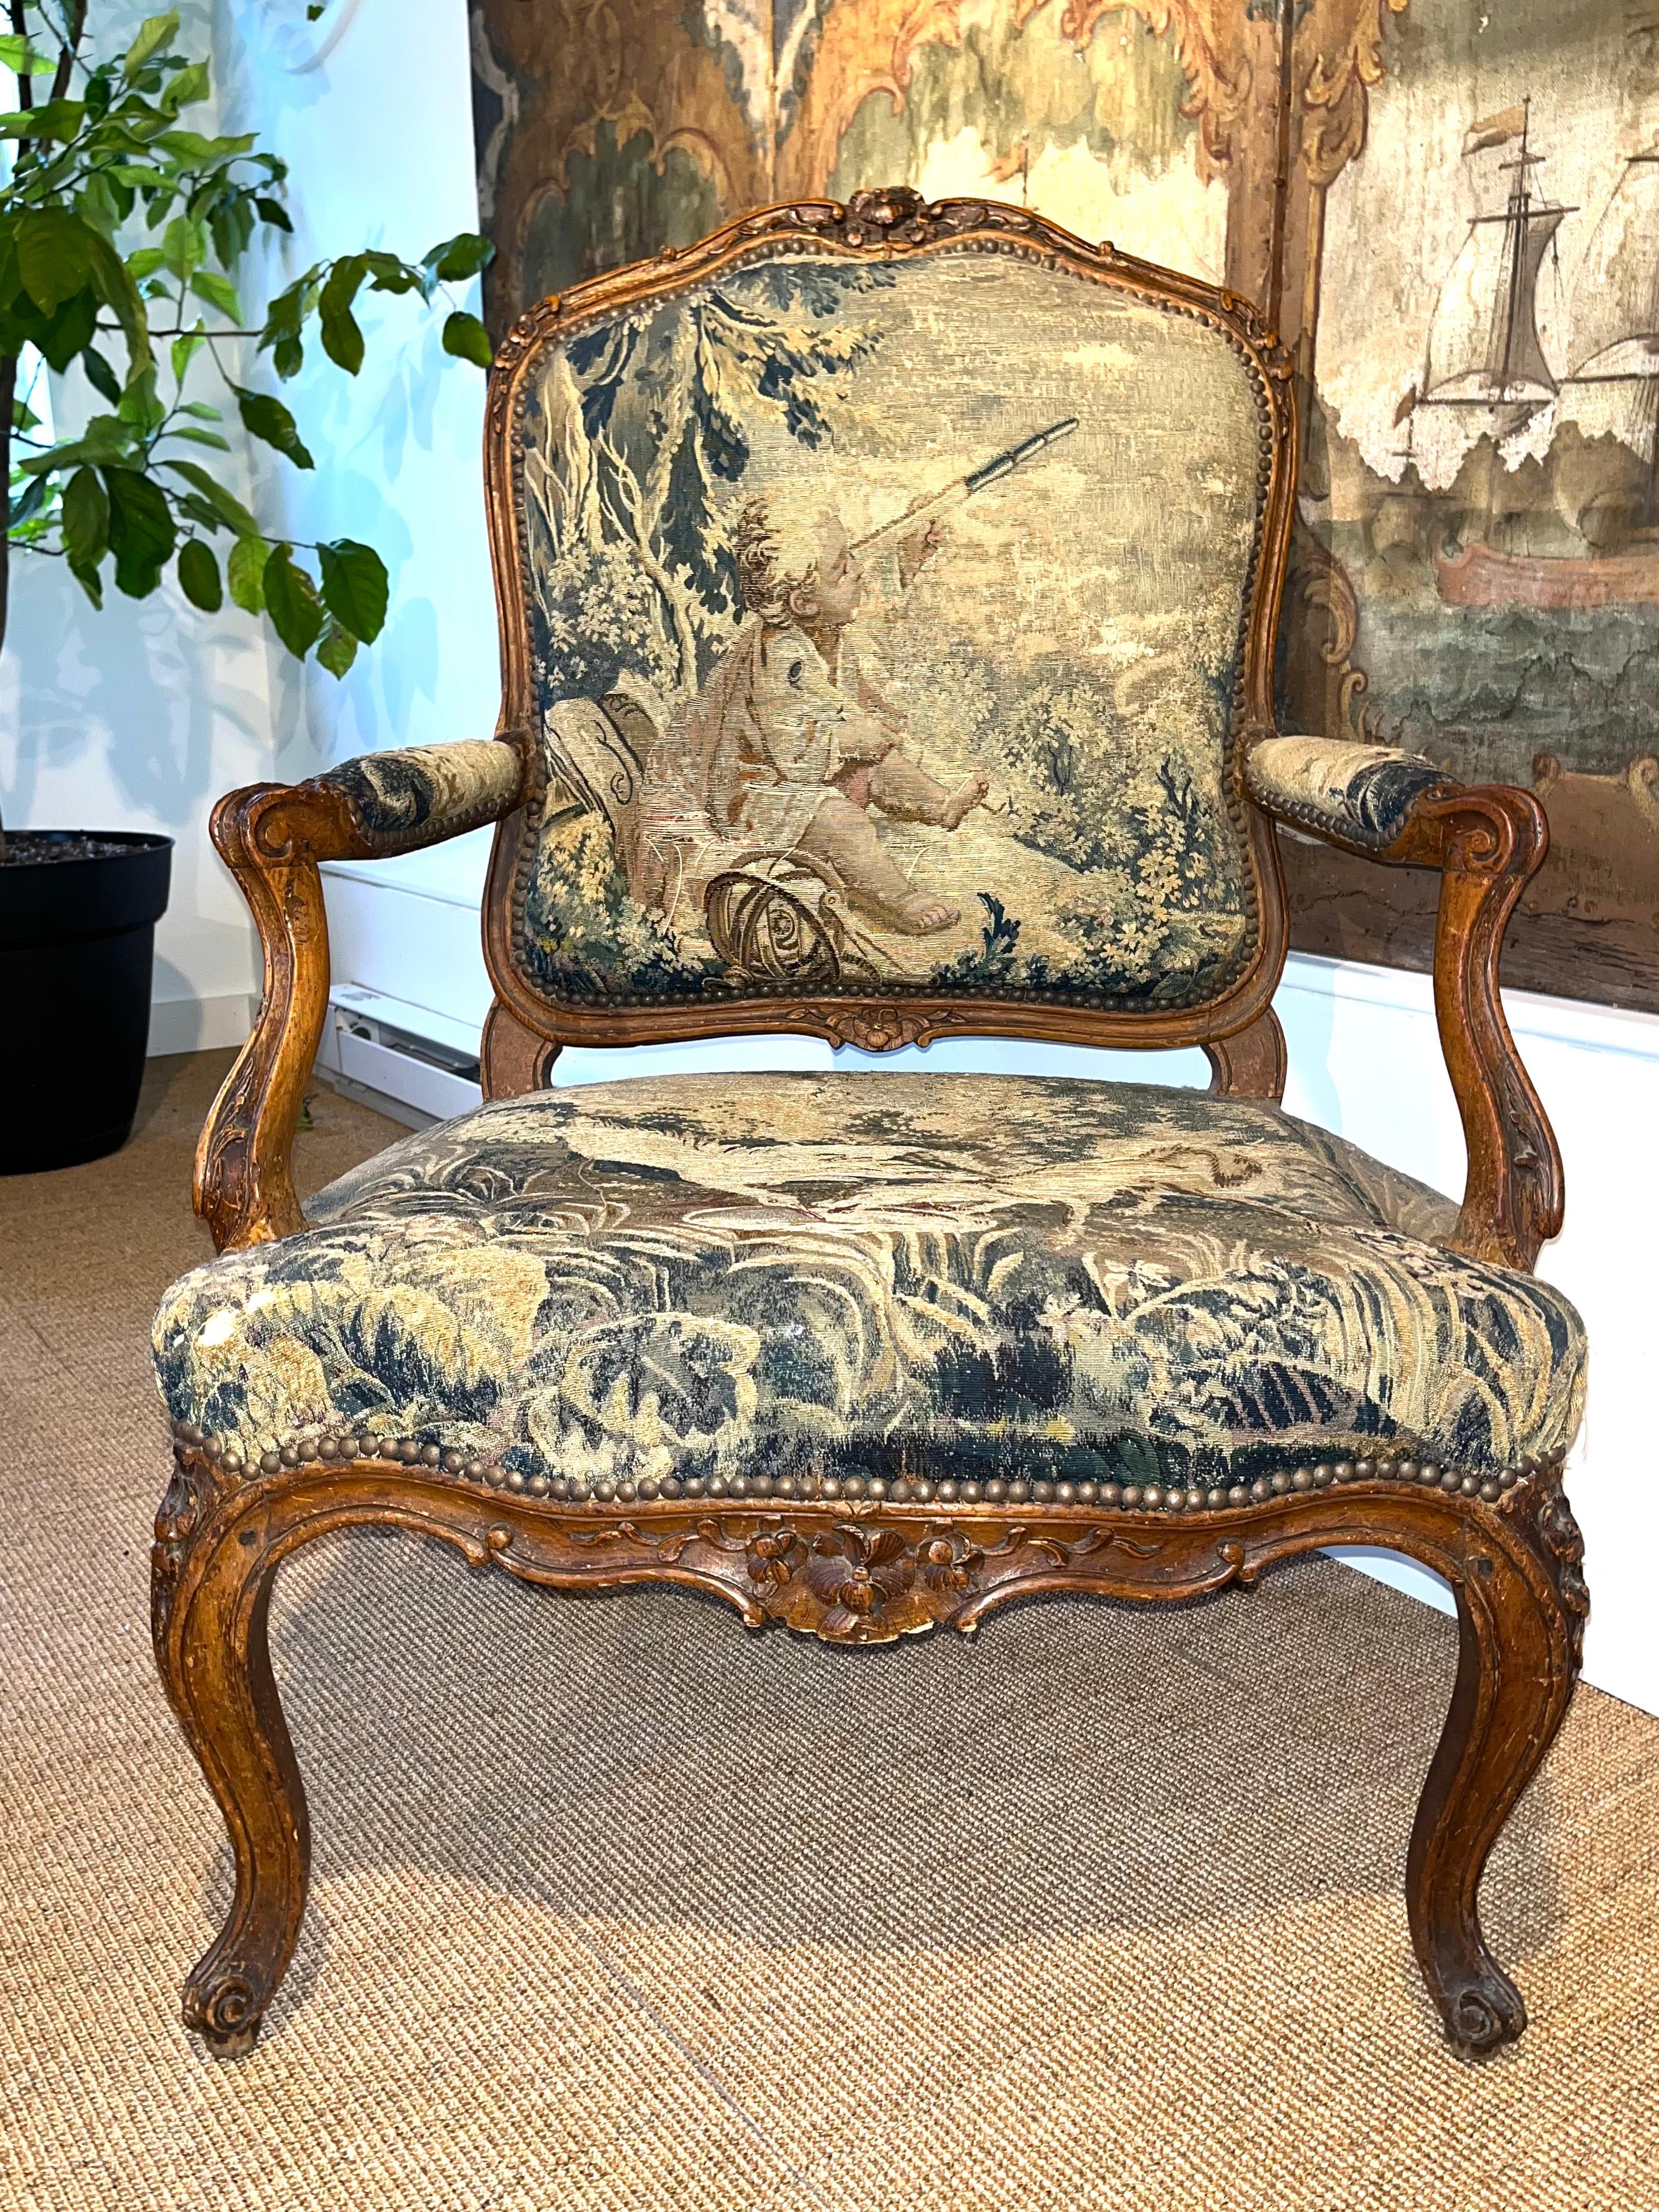 French Louis XV Fauteuil a La Reine, Signed “G. Lebrun” For Sale 5